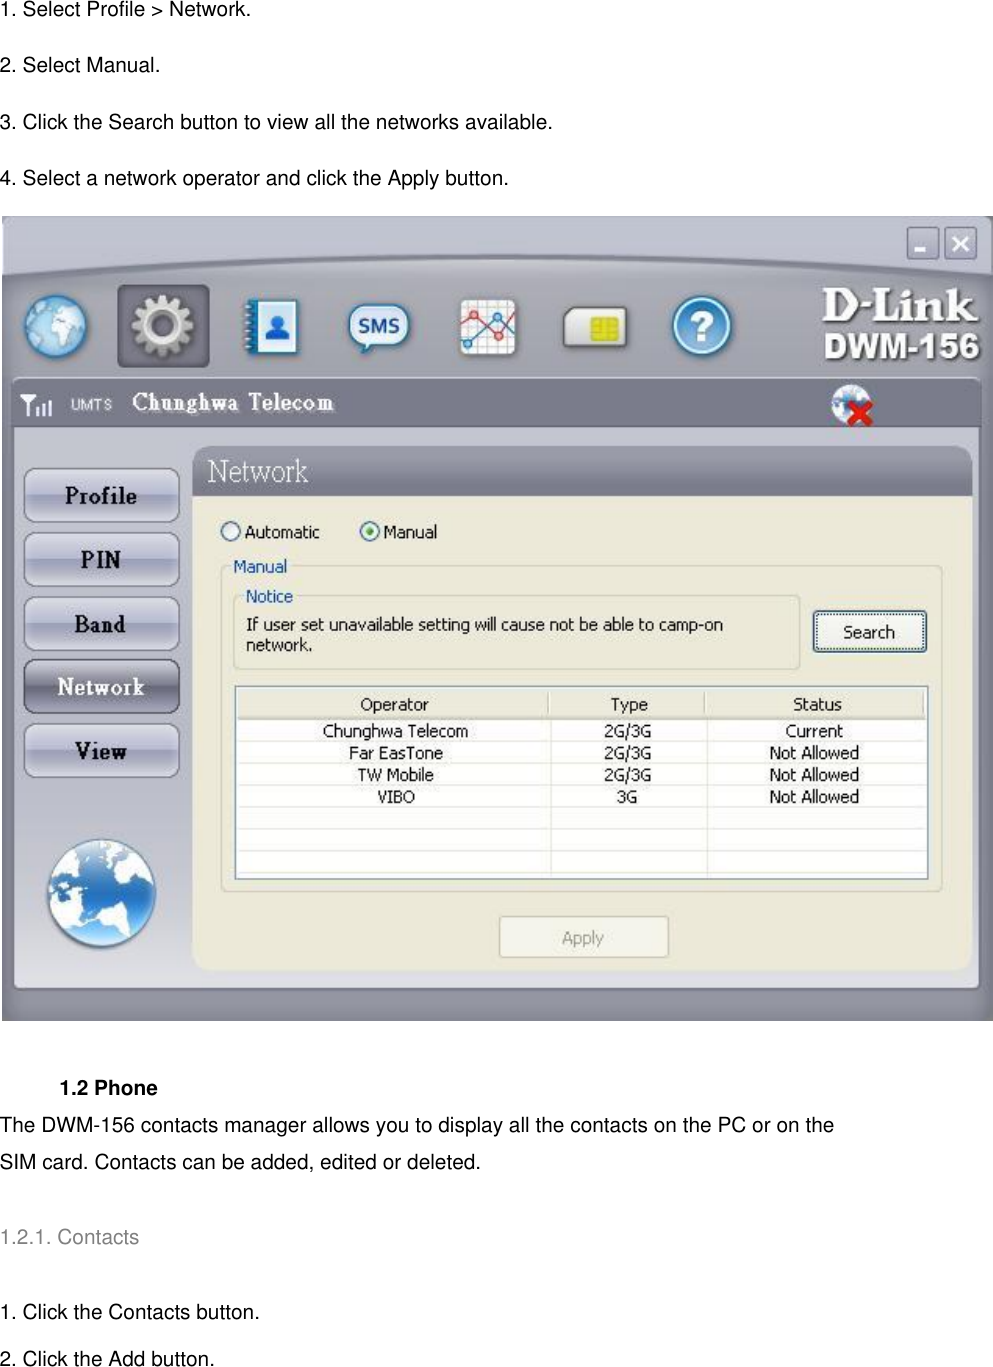 1. Select Profile &gt; Network. 2. Select Manual. 3. Click the Search button to view all the networks available. 4. Select a network operator and click the Apply button.      1.2 Phone   The DWM-156 contacts manager allows you to display all the contacts on the PC or on the SIM card. Contacts can be added, edited or deleted.   1.2.1. Contacts   1. Click the Contacts button. 2. Click the Add button. 